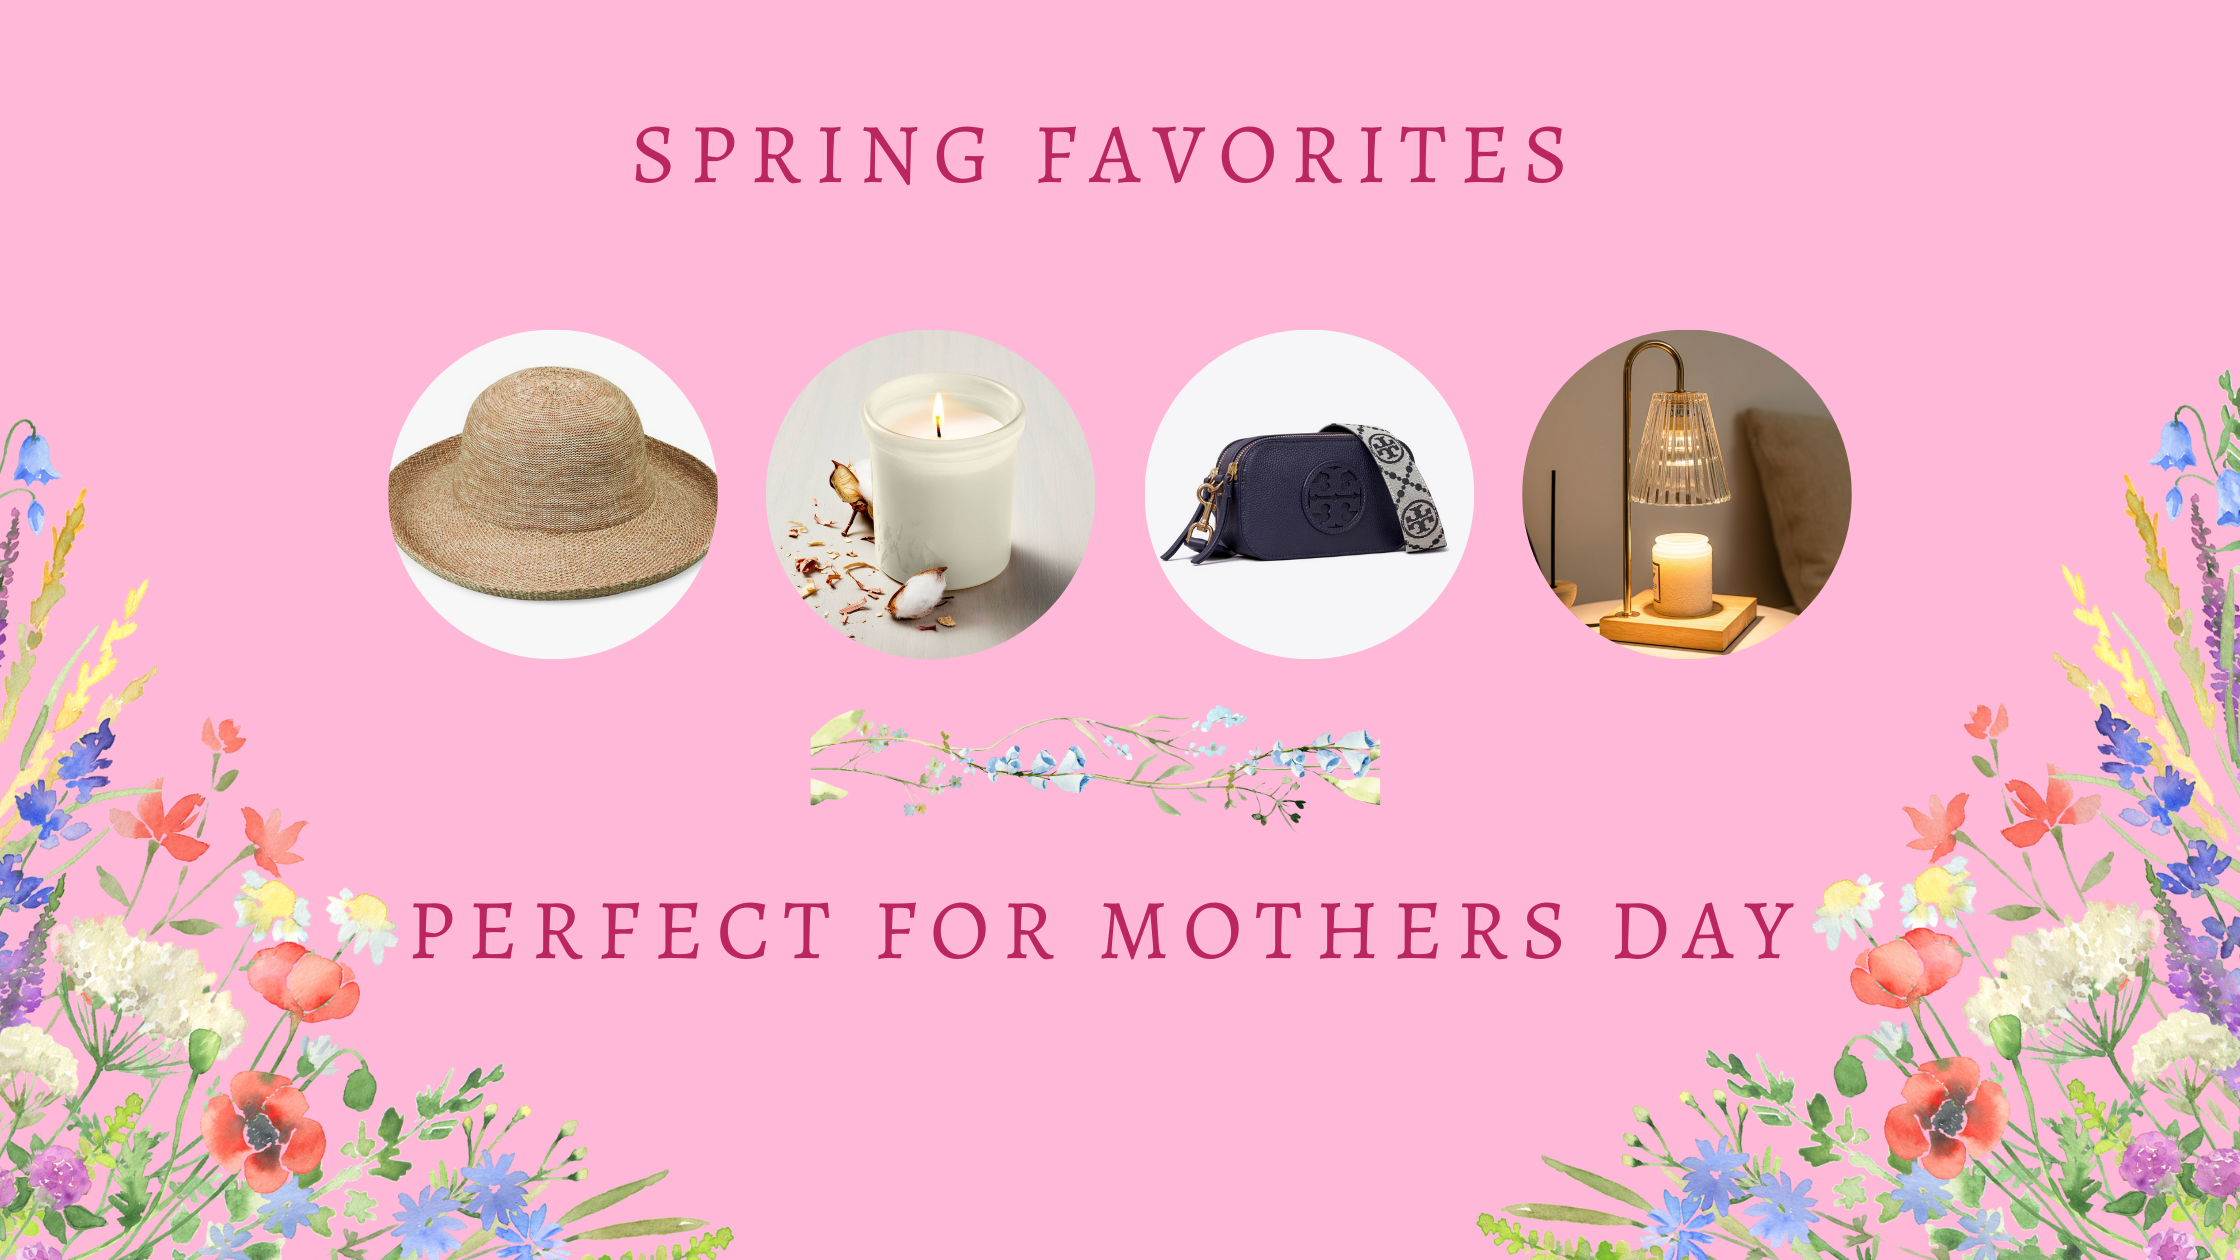 Blooming with Love: Thoughtful Mother’s Day Gifts to Welcome Spring!